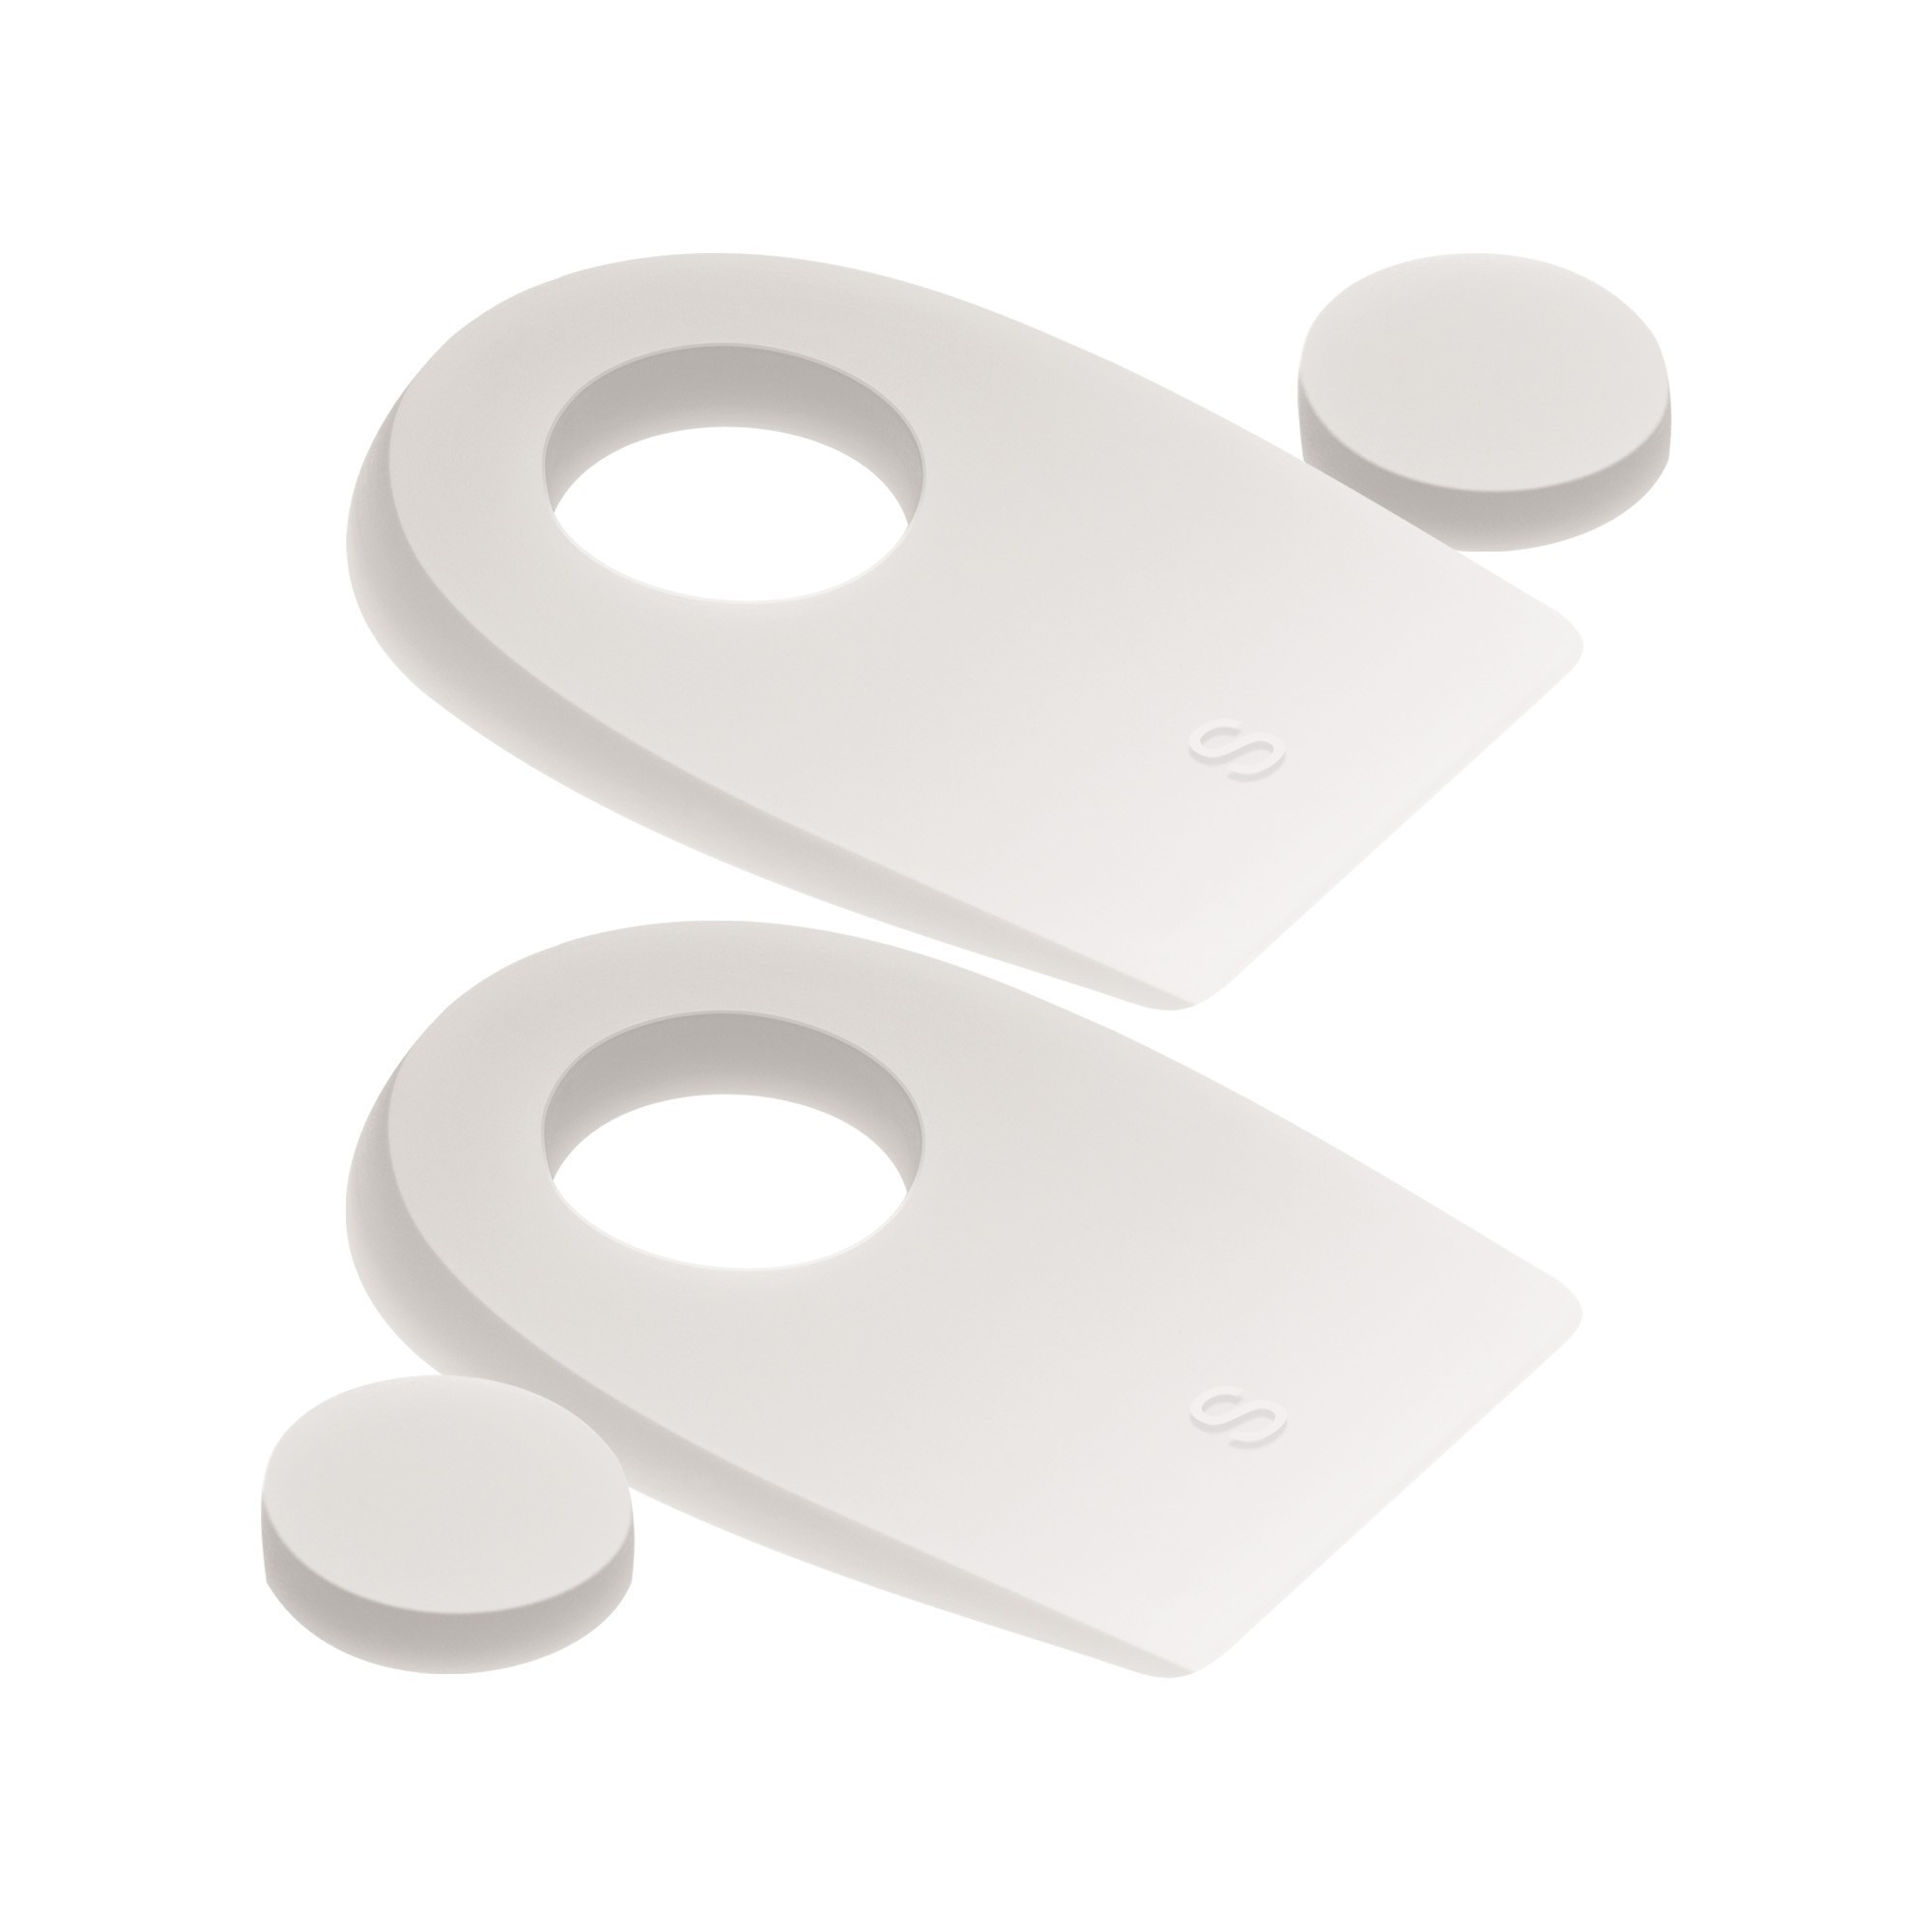 Silicone heel pads with removable central pad